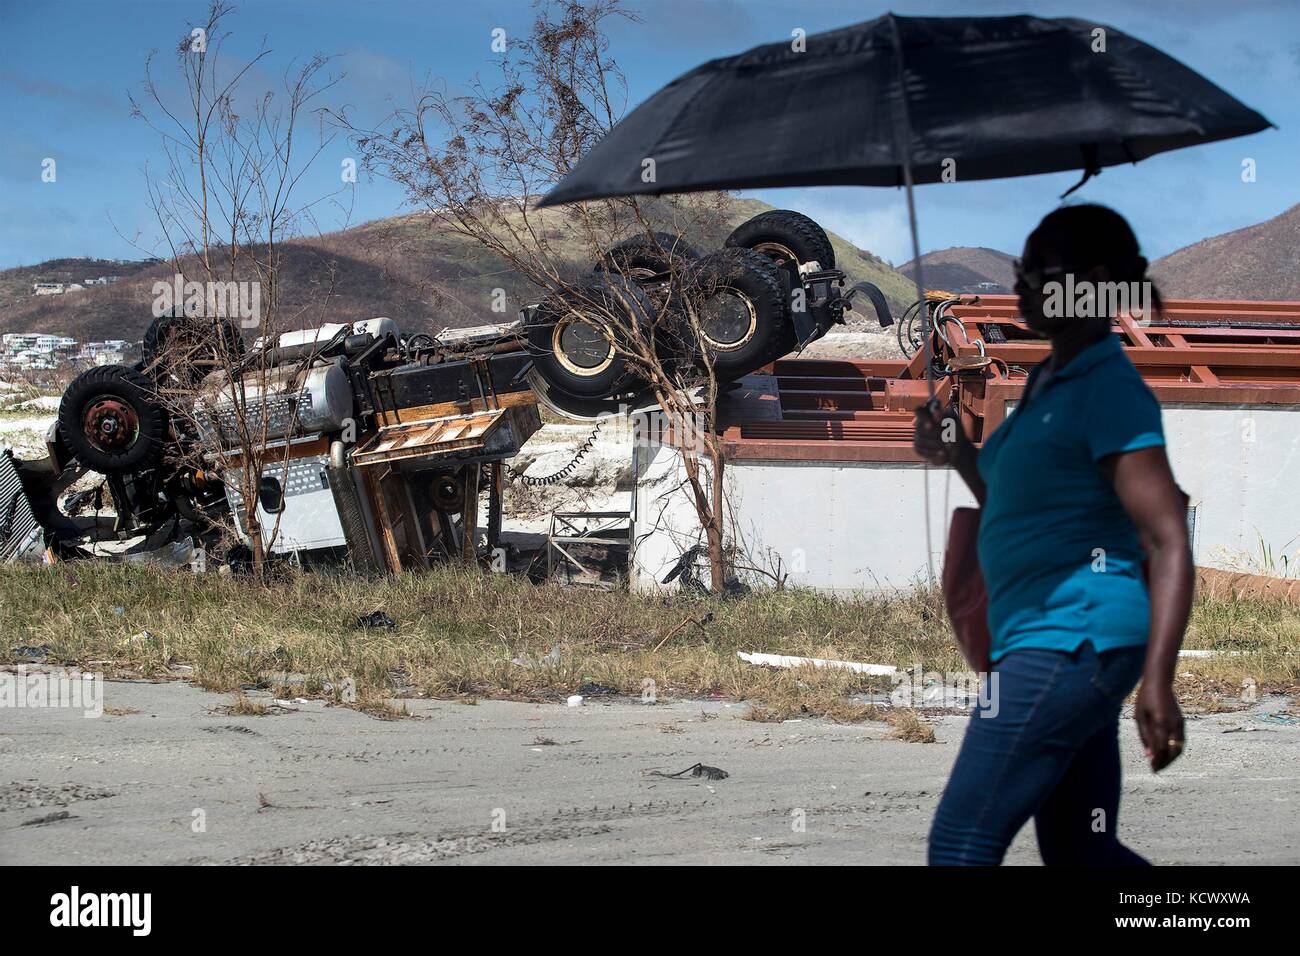 A resident walks past a destroyed truck in the aftermath of Hurricane Irma that devastated much of the Leeward Islands September 11, 2017 in Philipsburg, St. Maarten. Stock Photo